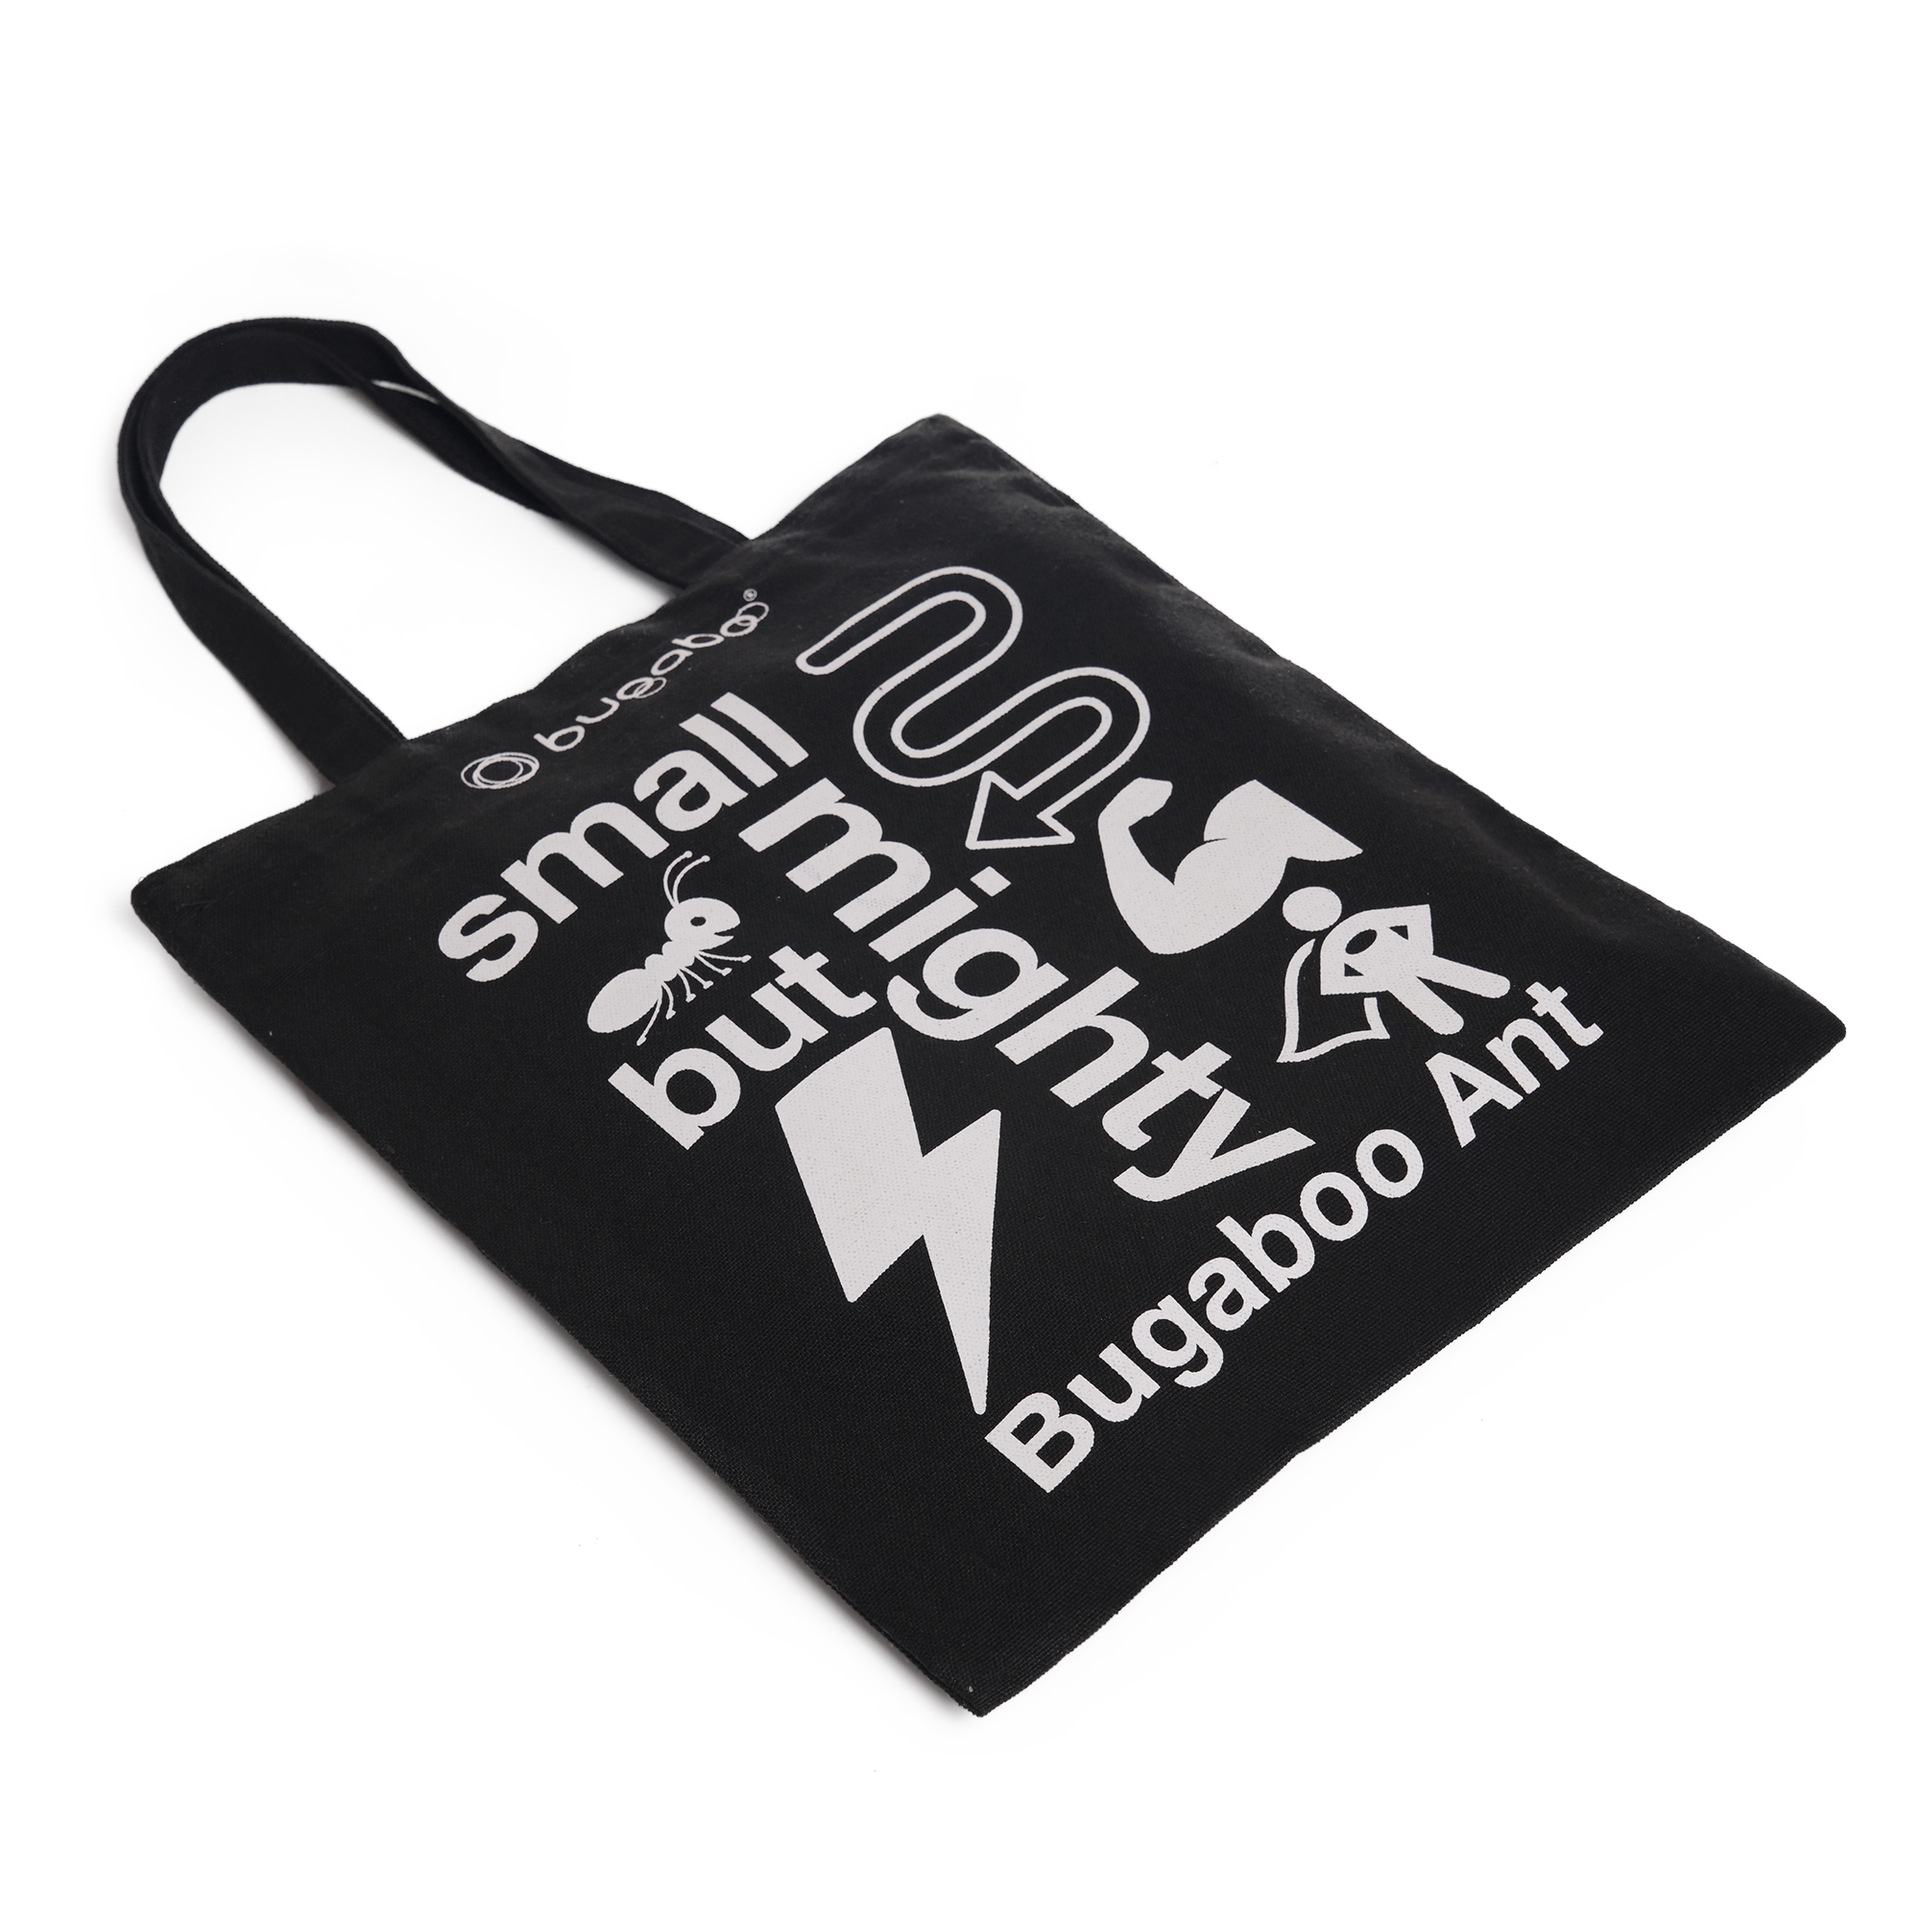 Top Quality Canvas Tote Bag with Zipper